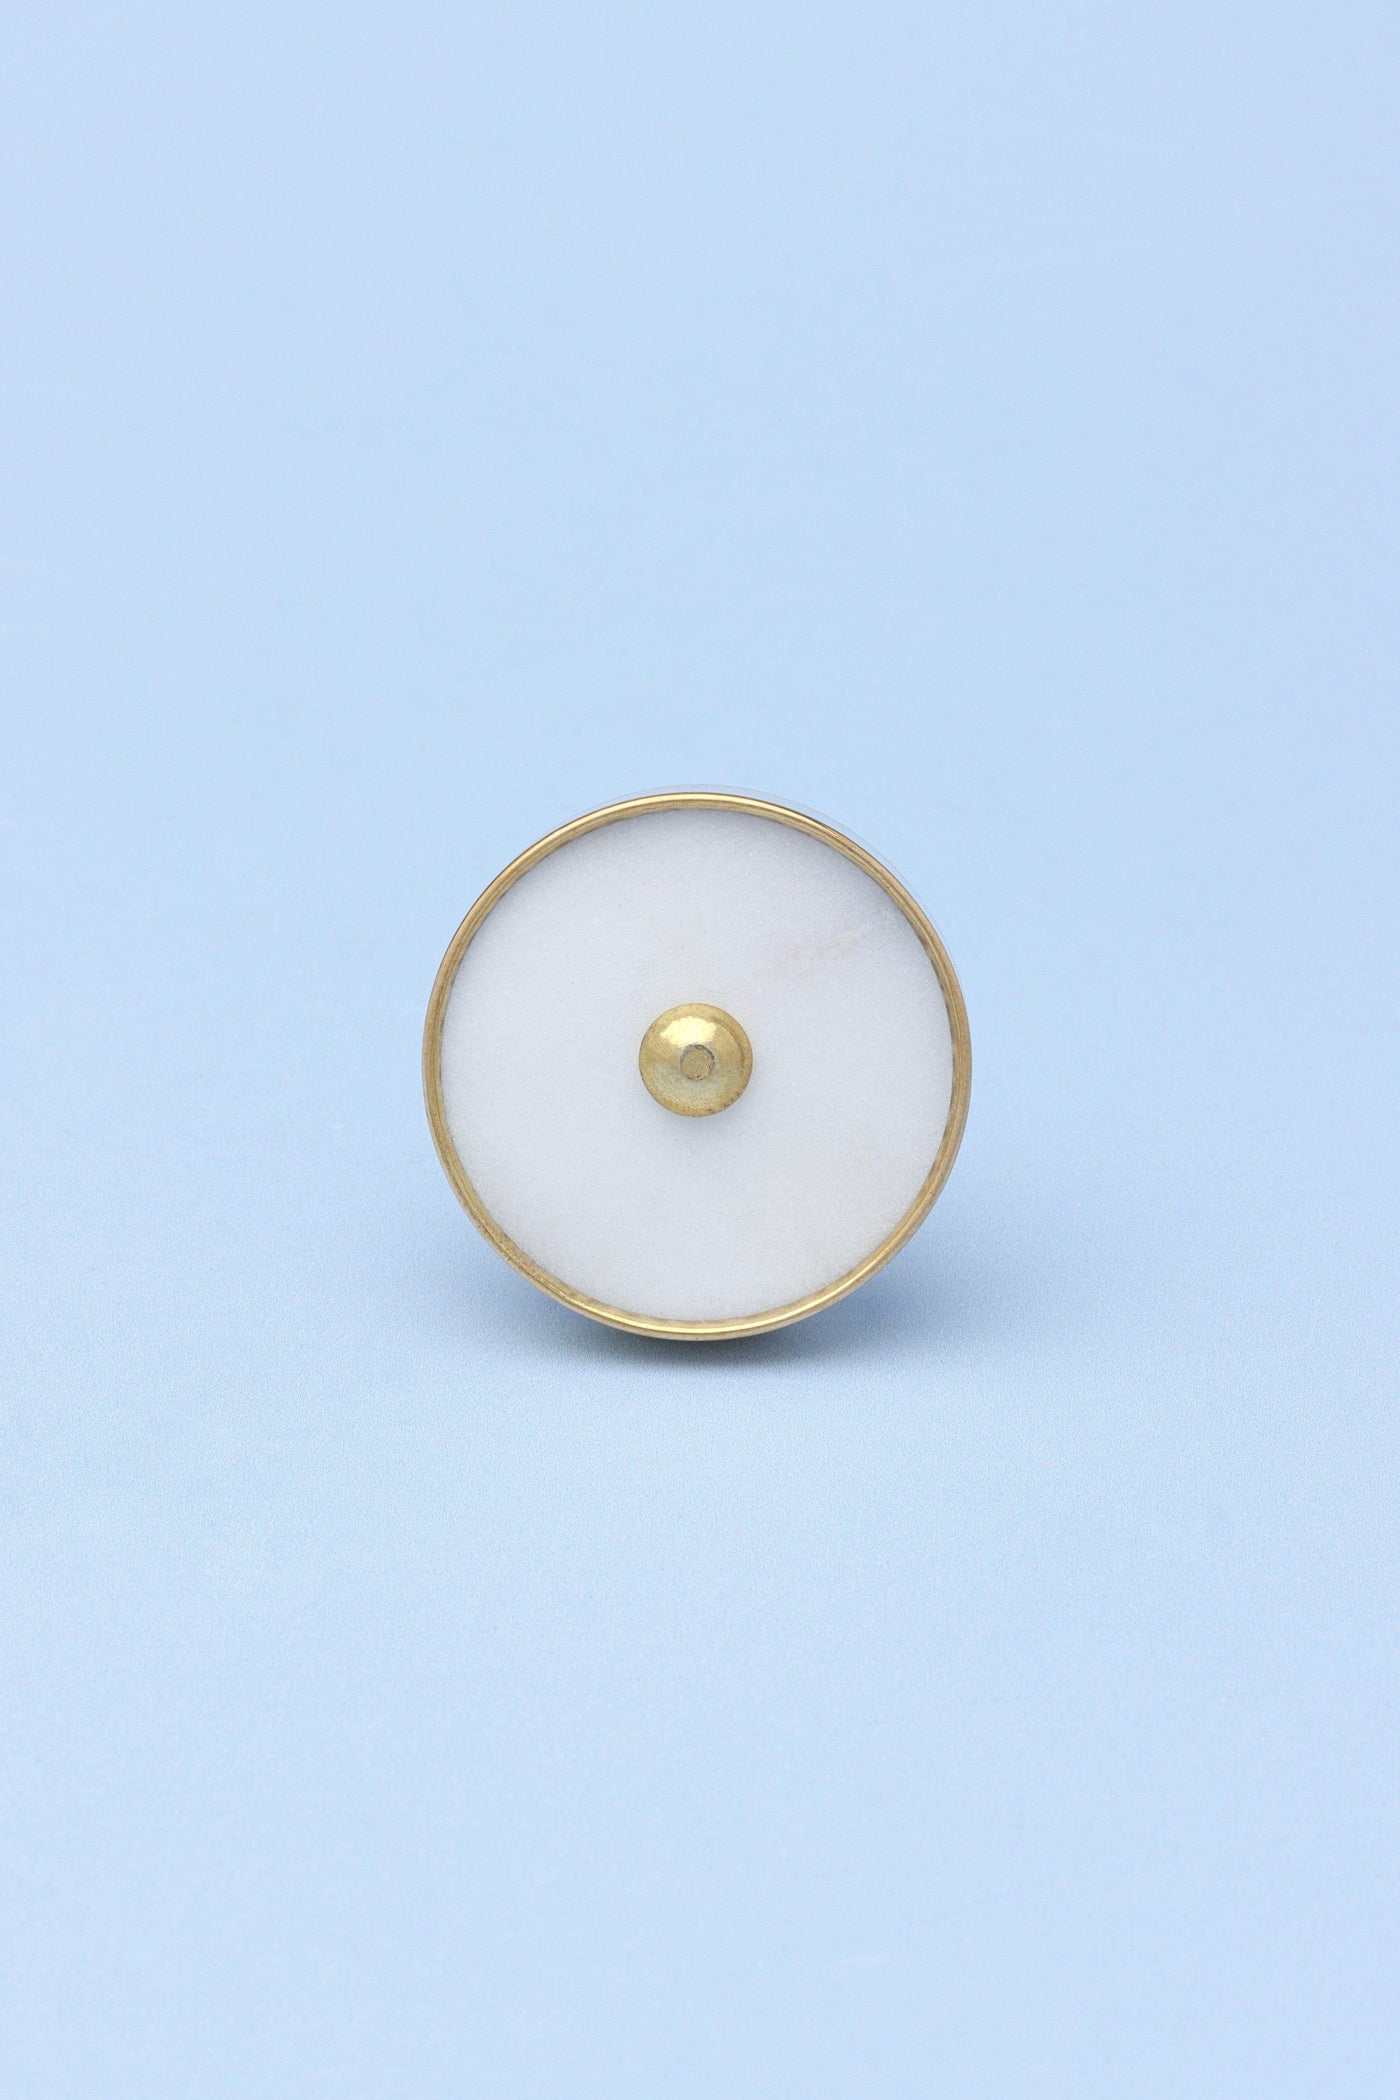 G Decor Door Knobs & Handles Gold / White Marble Brass Round Circular Detailed Pull Knobs By G Decor